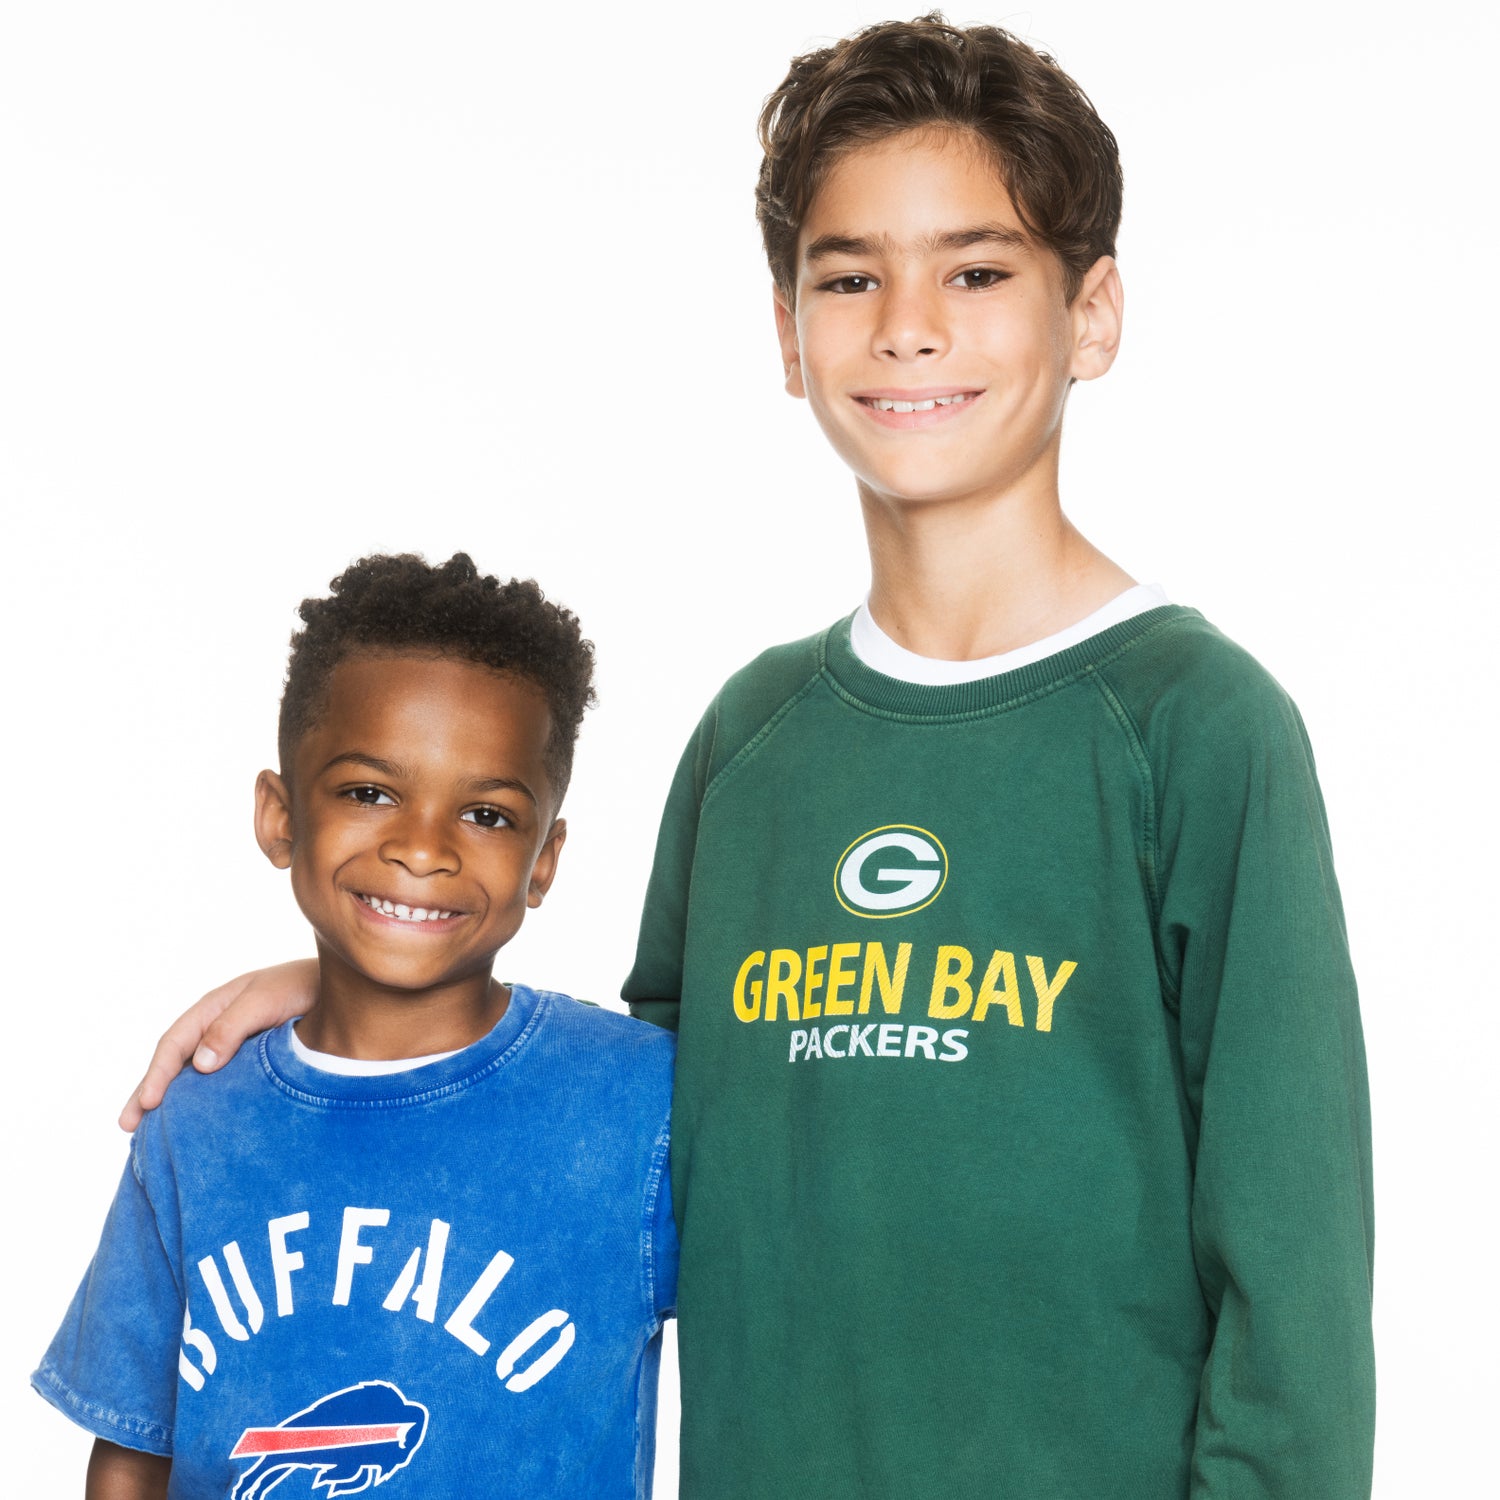 NFL Youth Apparel